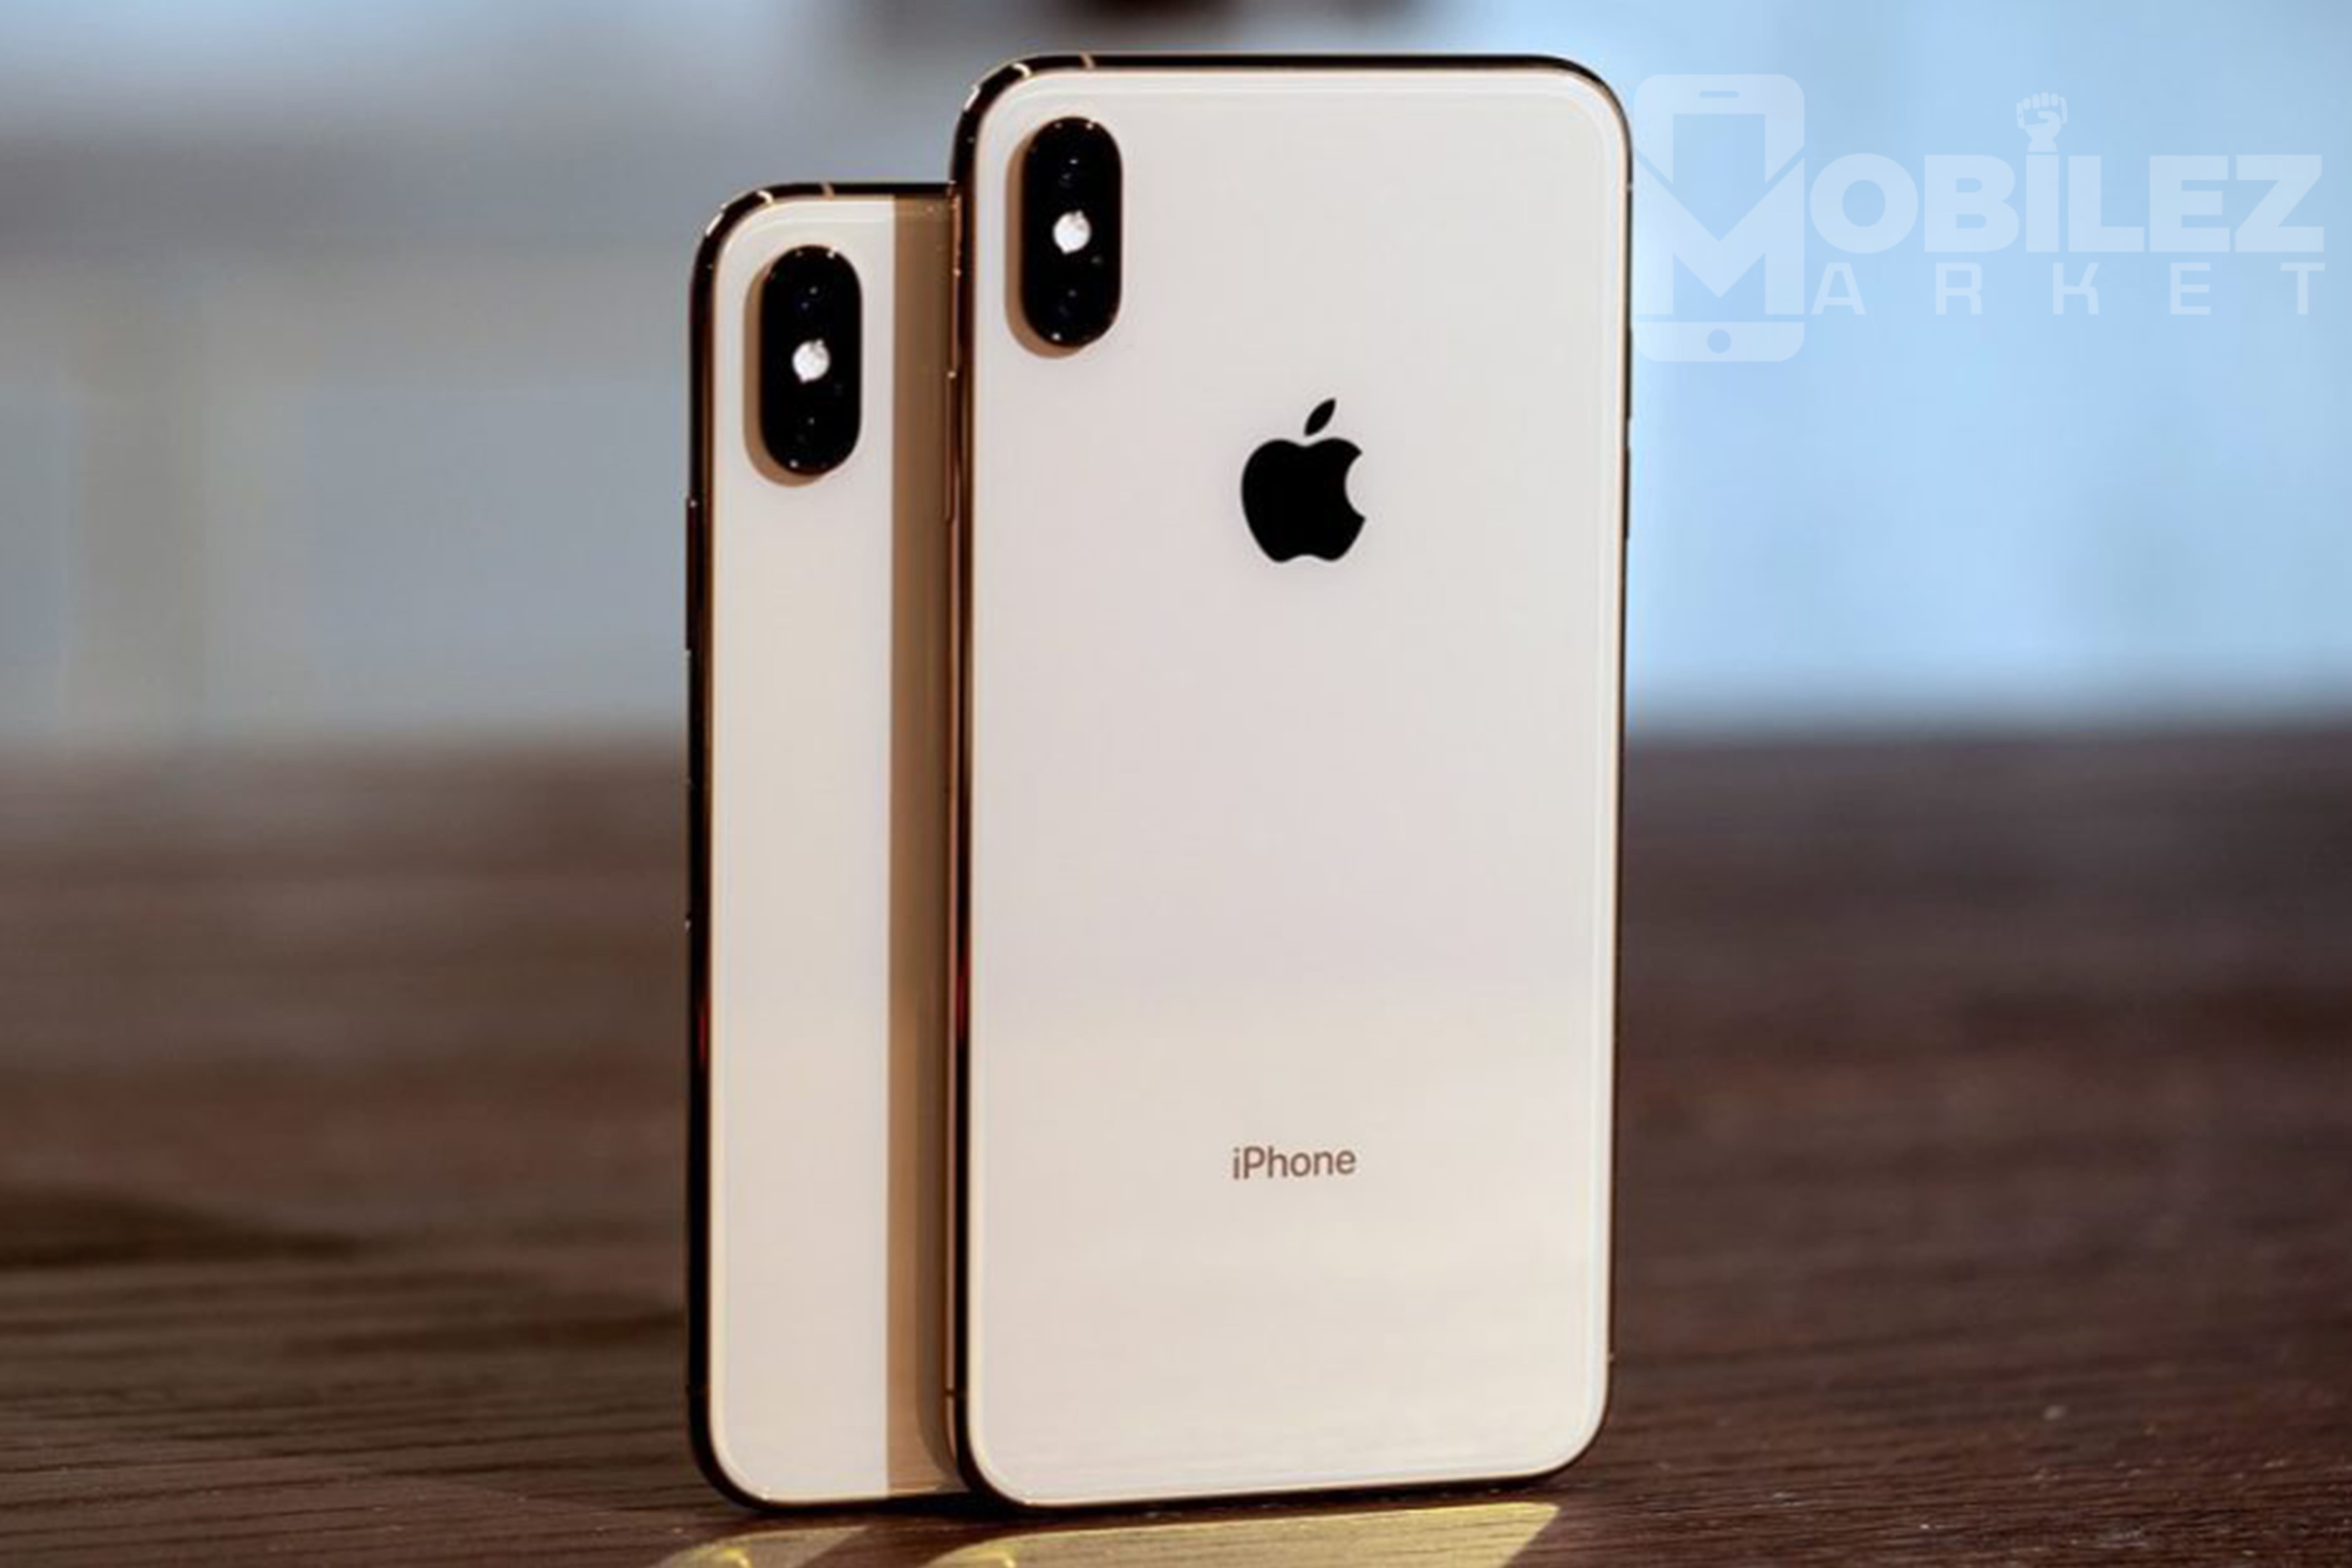 used iphone on installments in karachi | xs max for sale in karachi